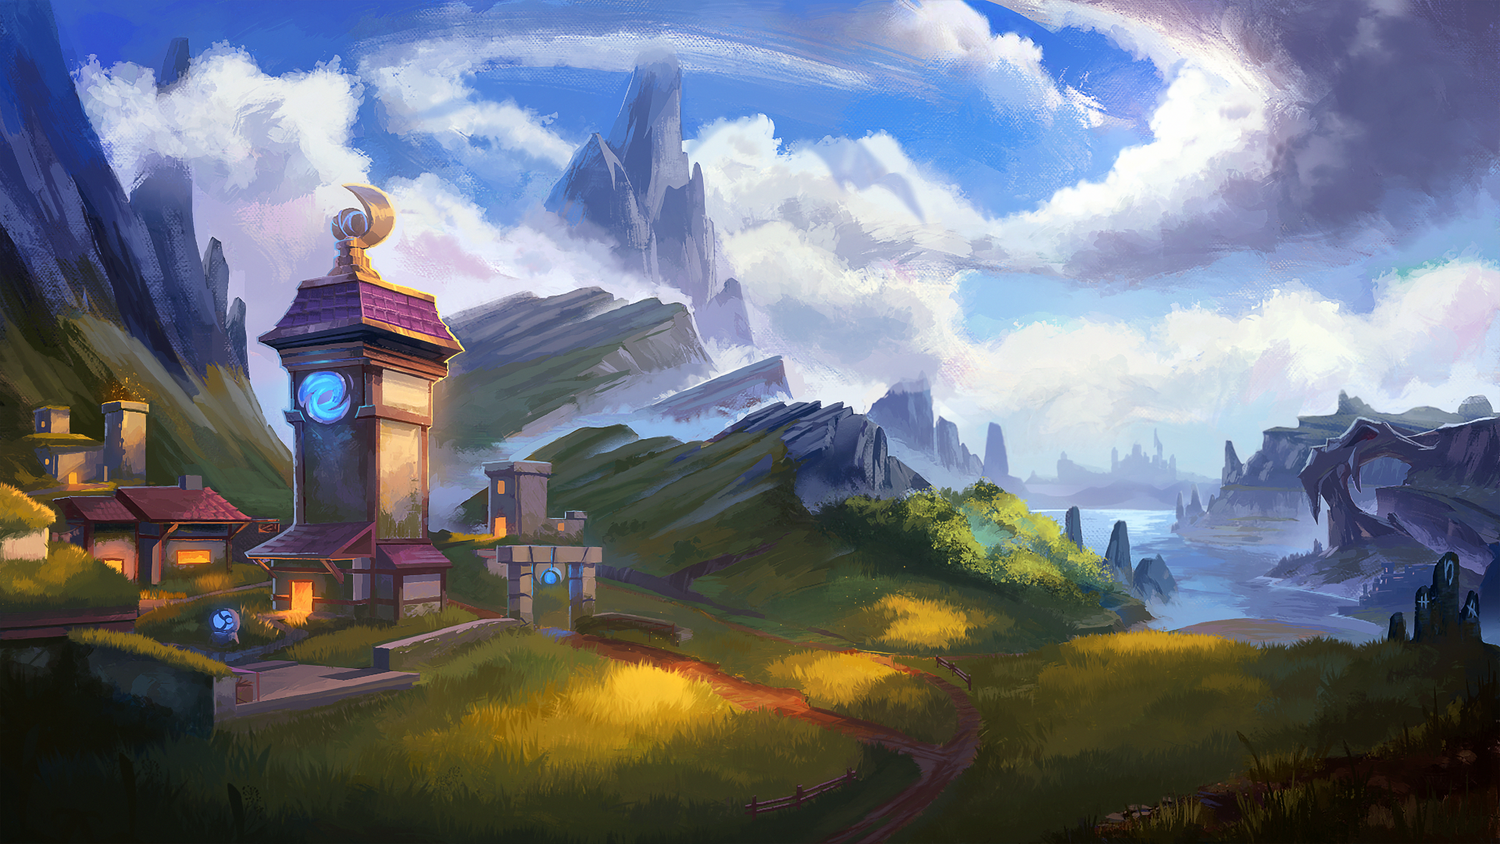 Stony mountains flanked by sunlit grass surround a fantasy village. The Lunar Tower stands to the left of the image like a clocktower. To the right are some stones with glowing runes in front of a distant cliff sized skull and lake.